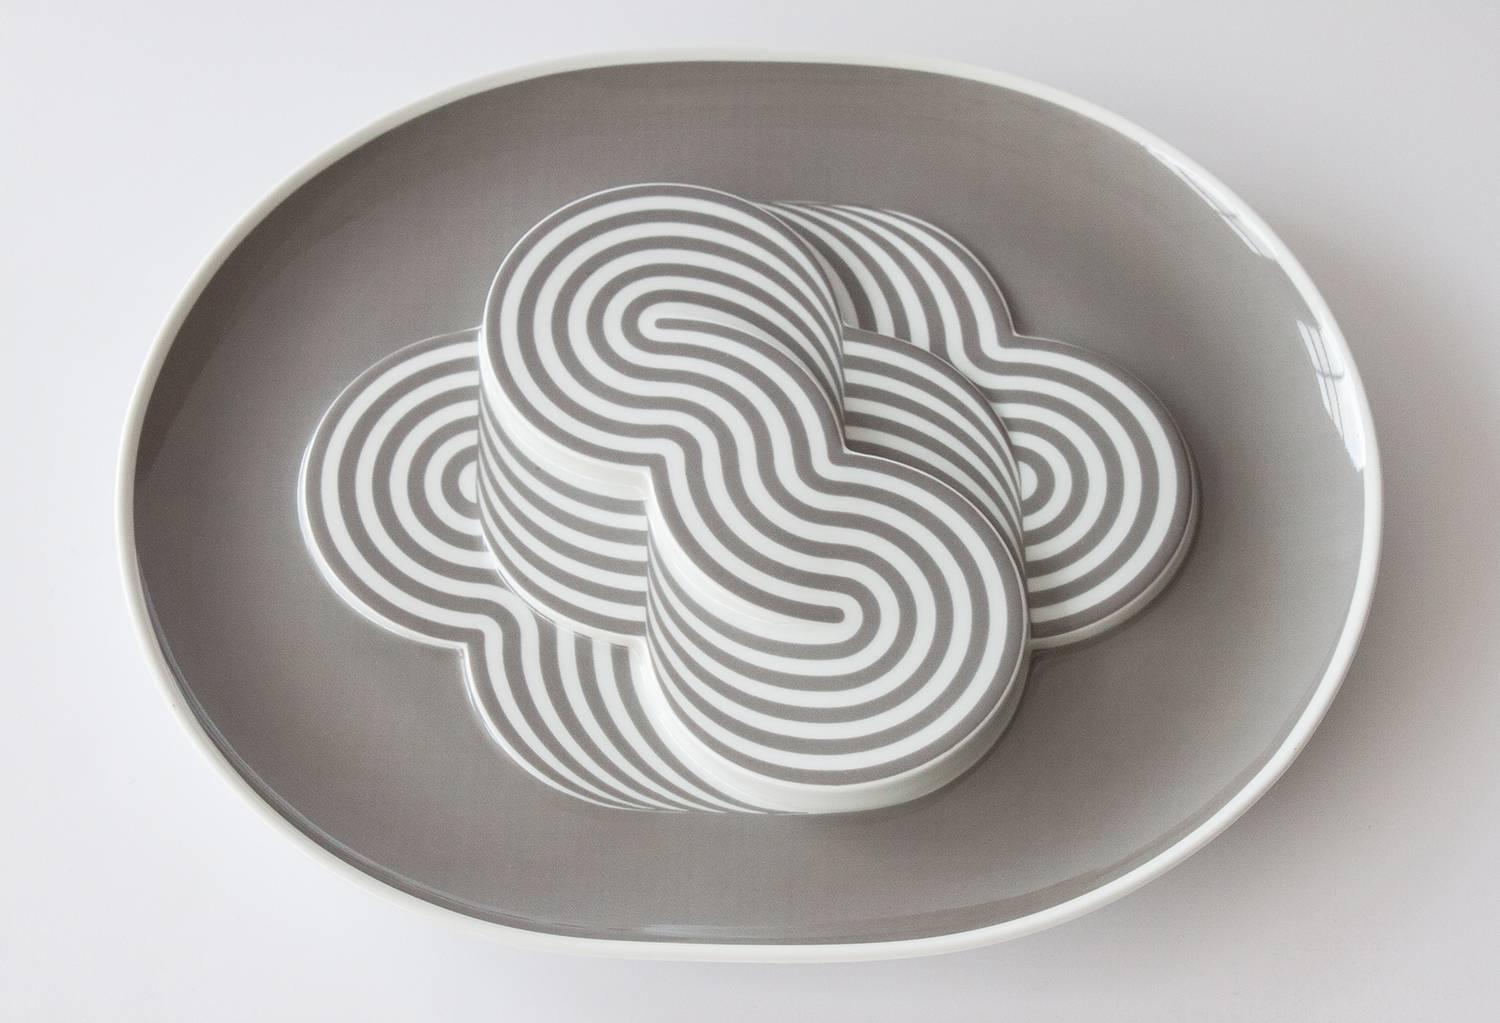 1972 Rosenthal Jahresteller Annual Plate designed by Natale Sapone. 
Limited edition 2583 of 3000.
